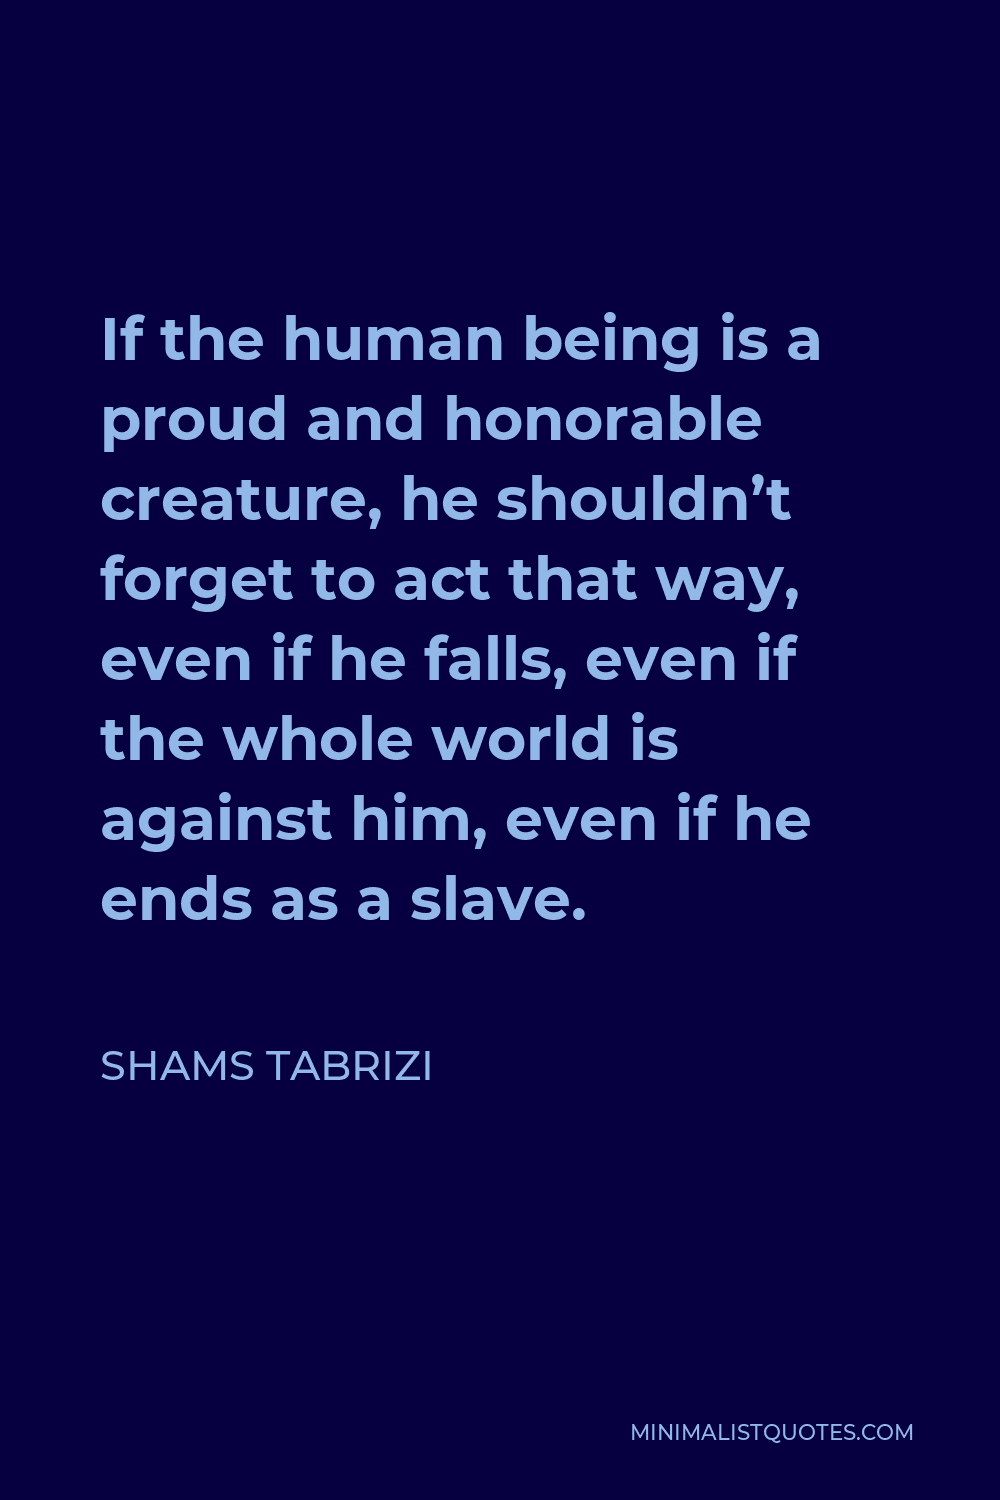 Shams Tabrizi Quote - If the human being is a proud and honorable creature, he shouldn’t forget to act that way, even if he falls, even if the whole world is against him, even if he ends as a slave.